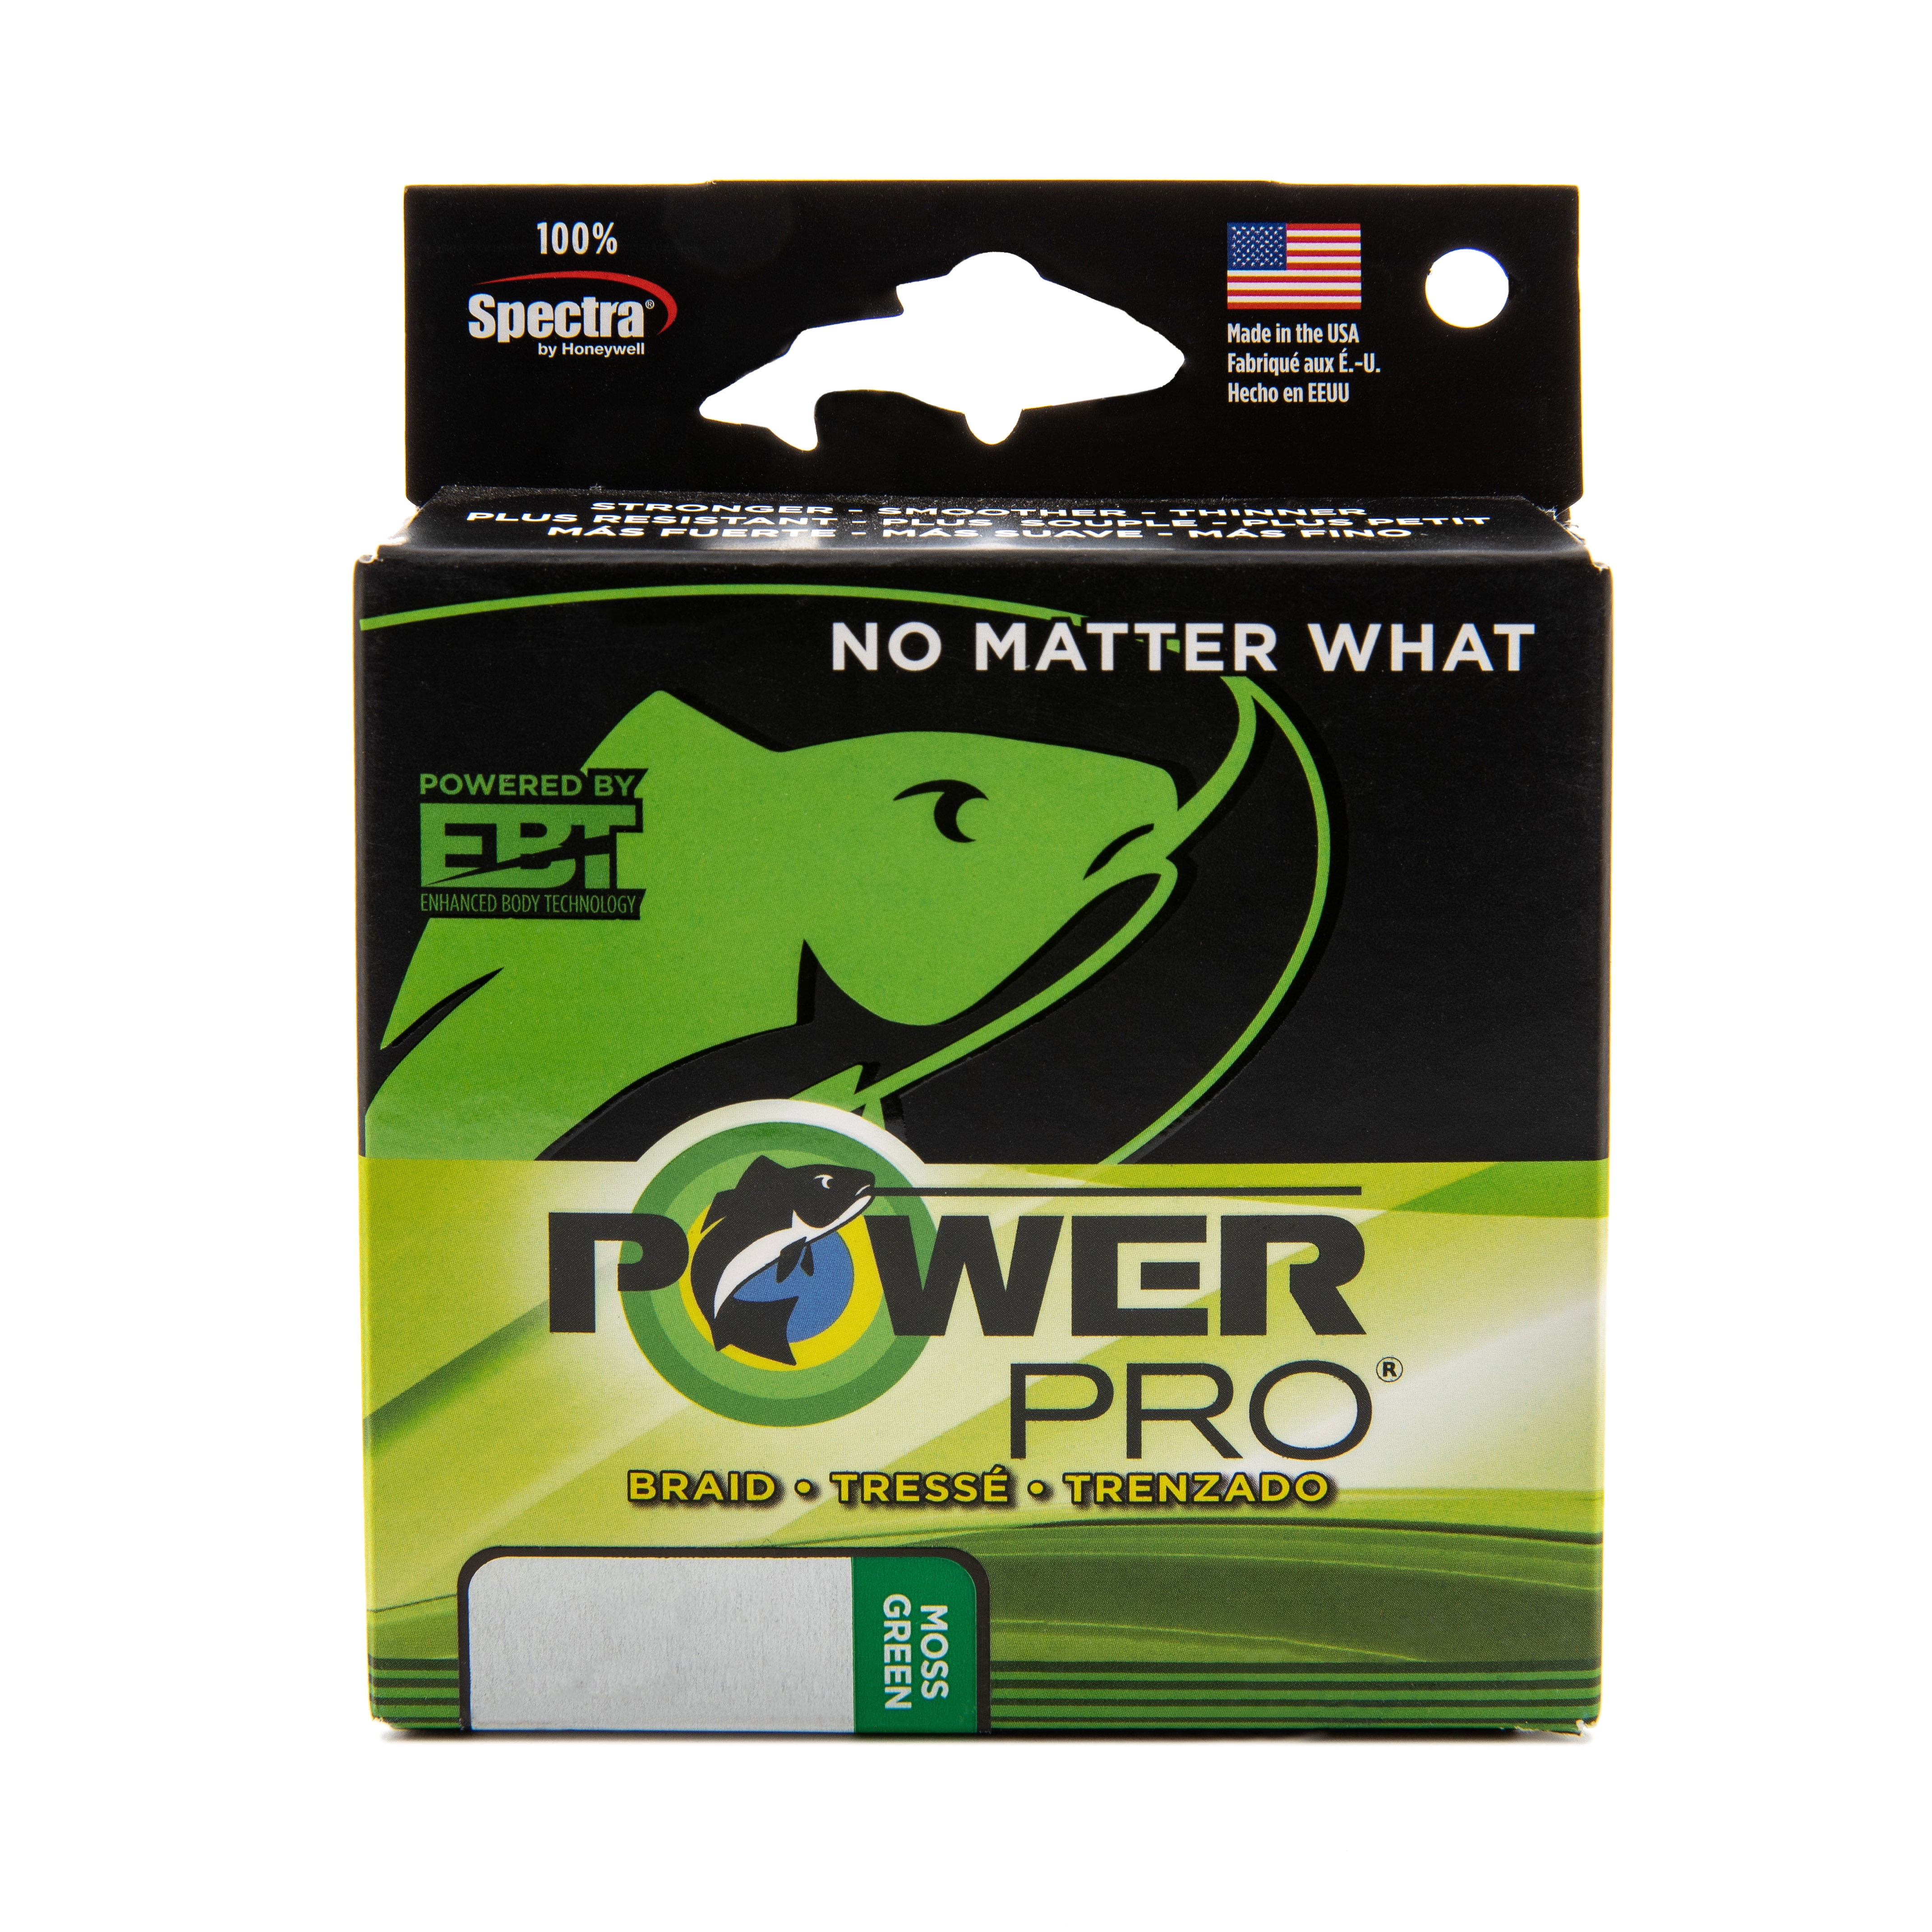 Power Pro 21100403000e Braided Line 40lb 3000 Yards Green for sale online 